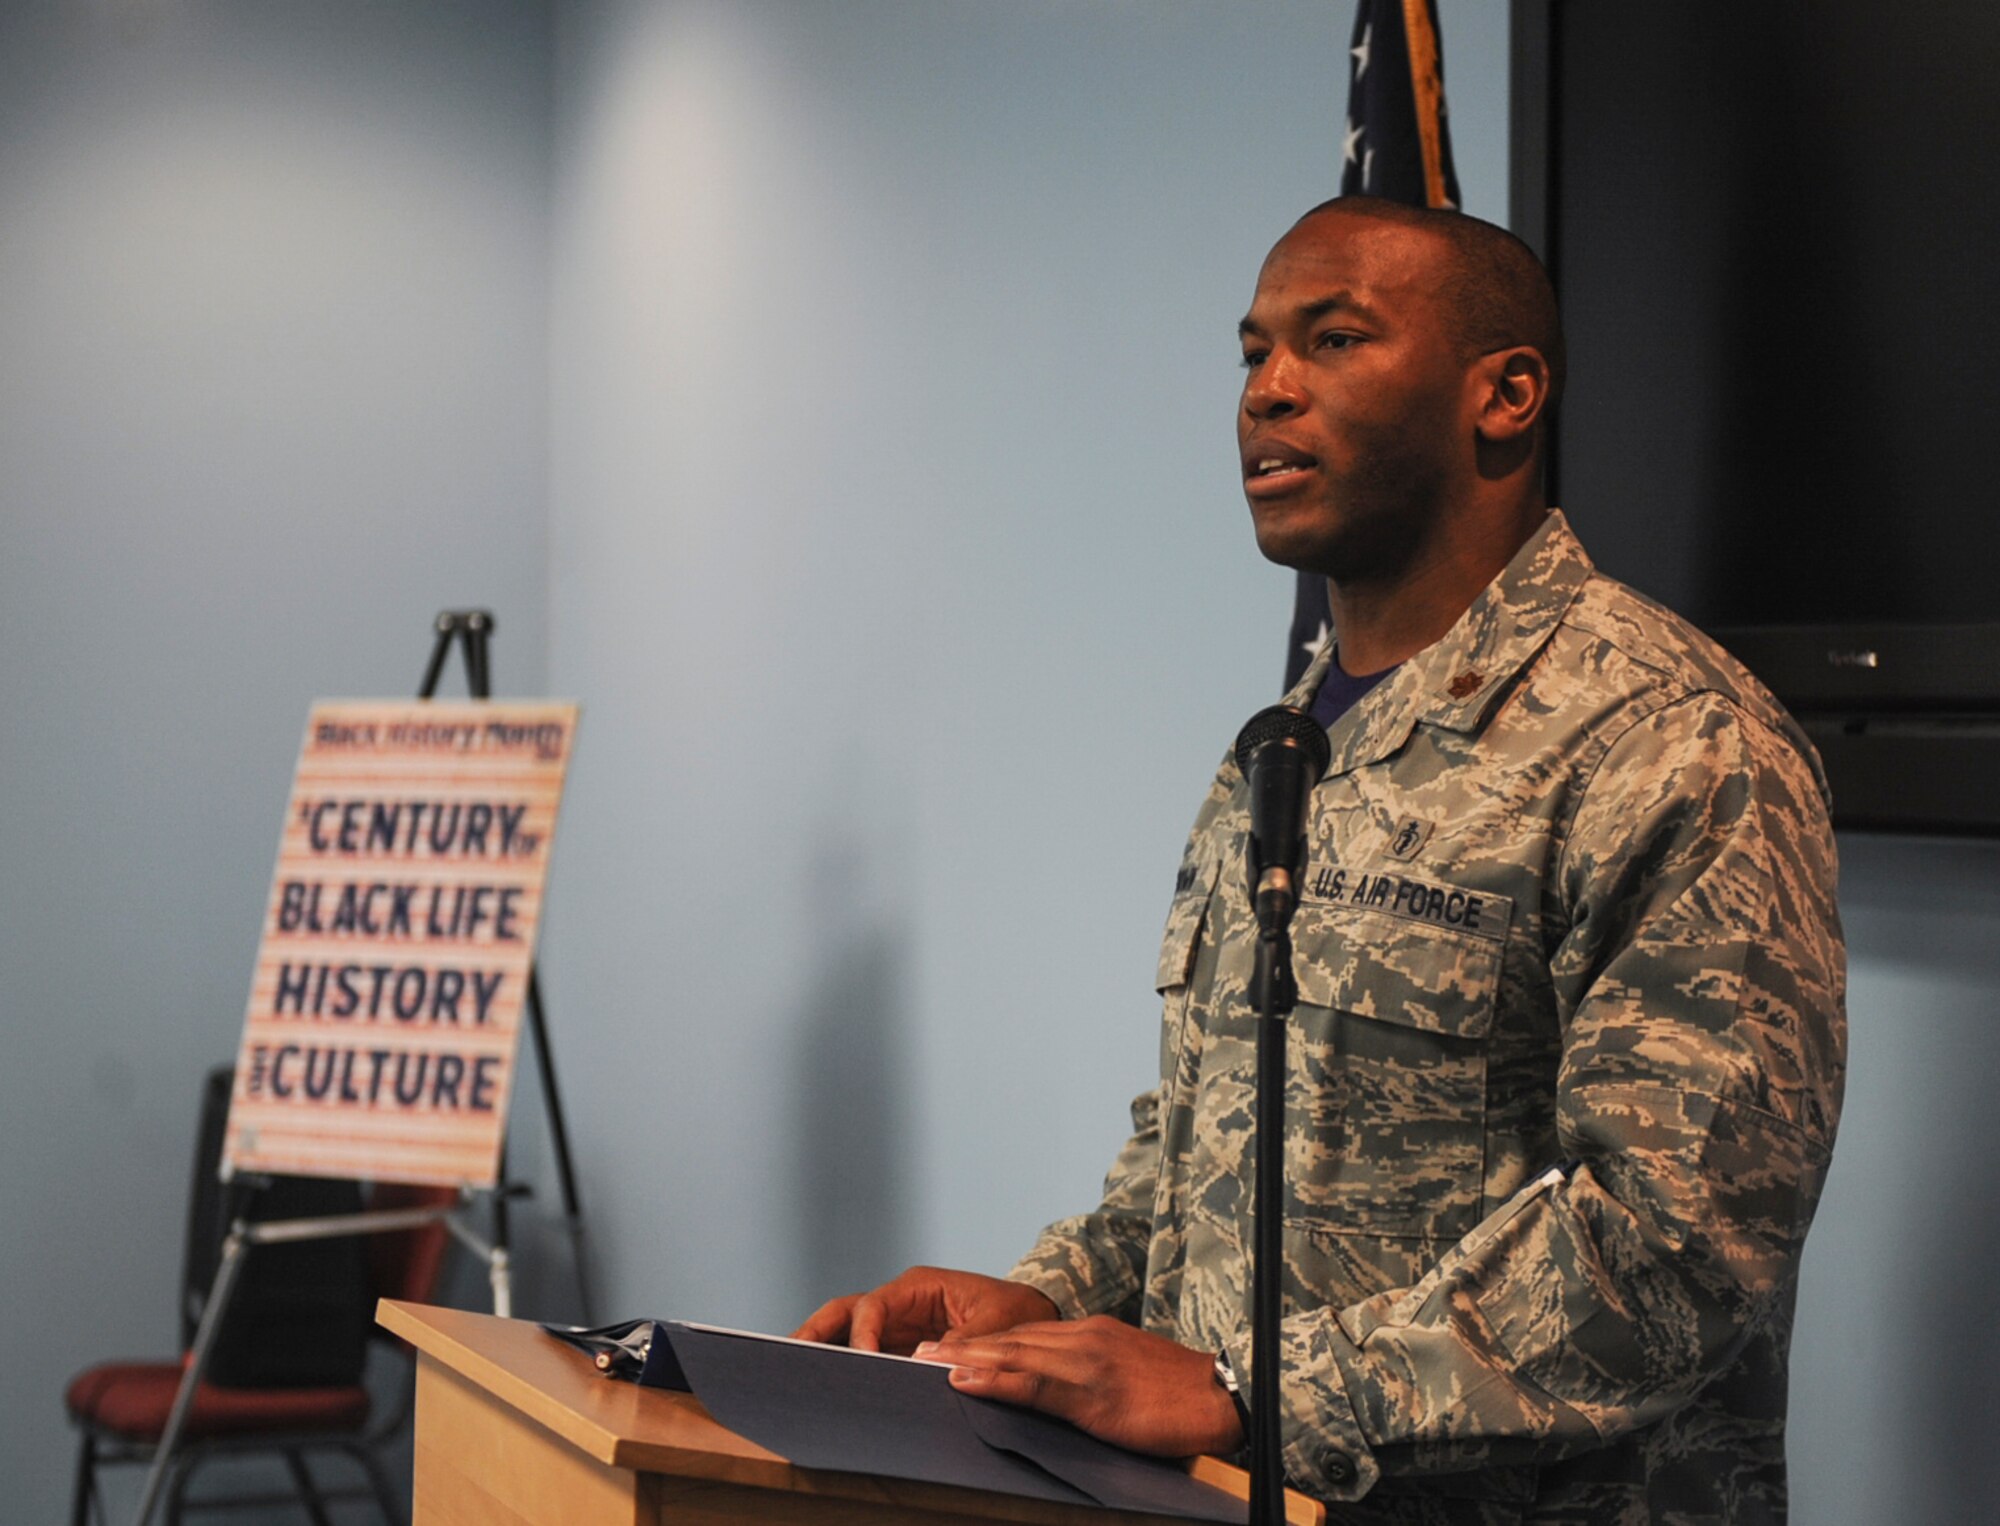 U.S. Air Force Maj. Sherrod Brown, 23d Medical Group bioenvironmental engineering flight commander, speaks during the Black History Month luncheon Feb. 27, 2015, at Moody Air Force Base, Ga. Brown spoke about prominent African-American individuals who made significant contributions in military history. (U.S. Air Force photo by Senior Airman Olivia Bumpers/Released)